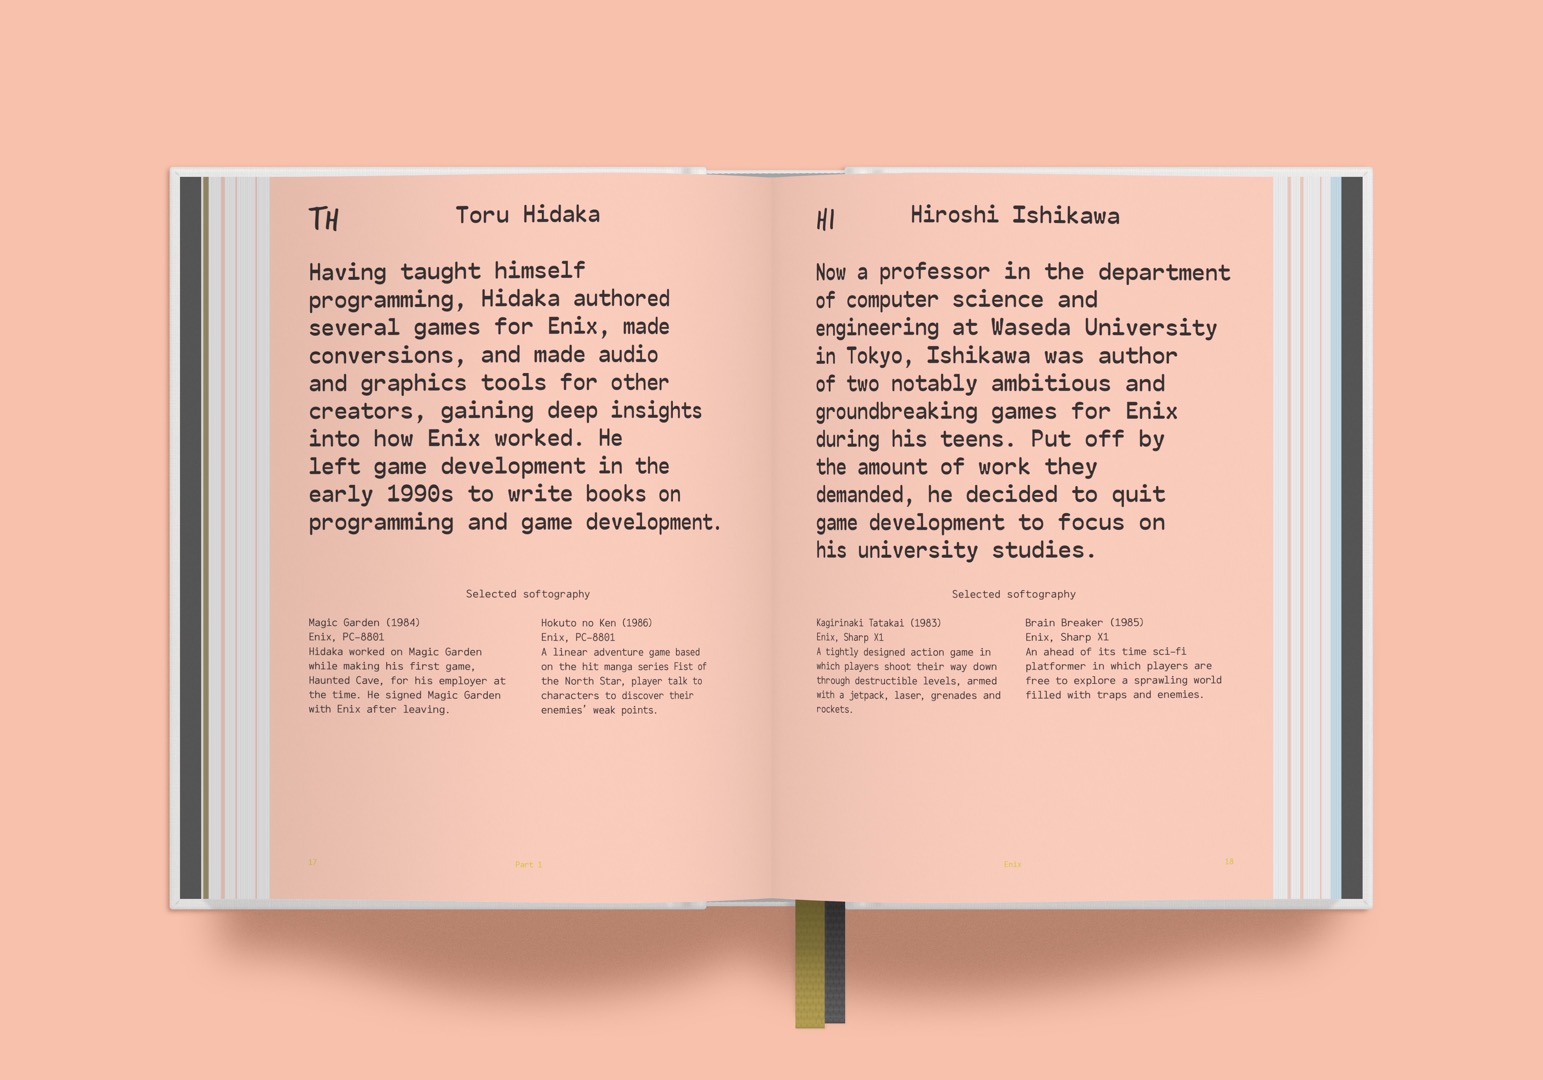 An image of pages in Japansoft that cover speakers’ biographies